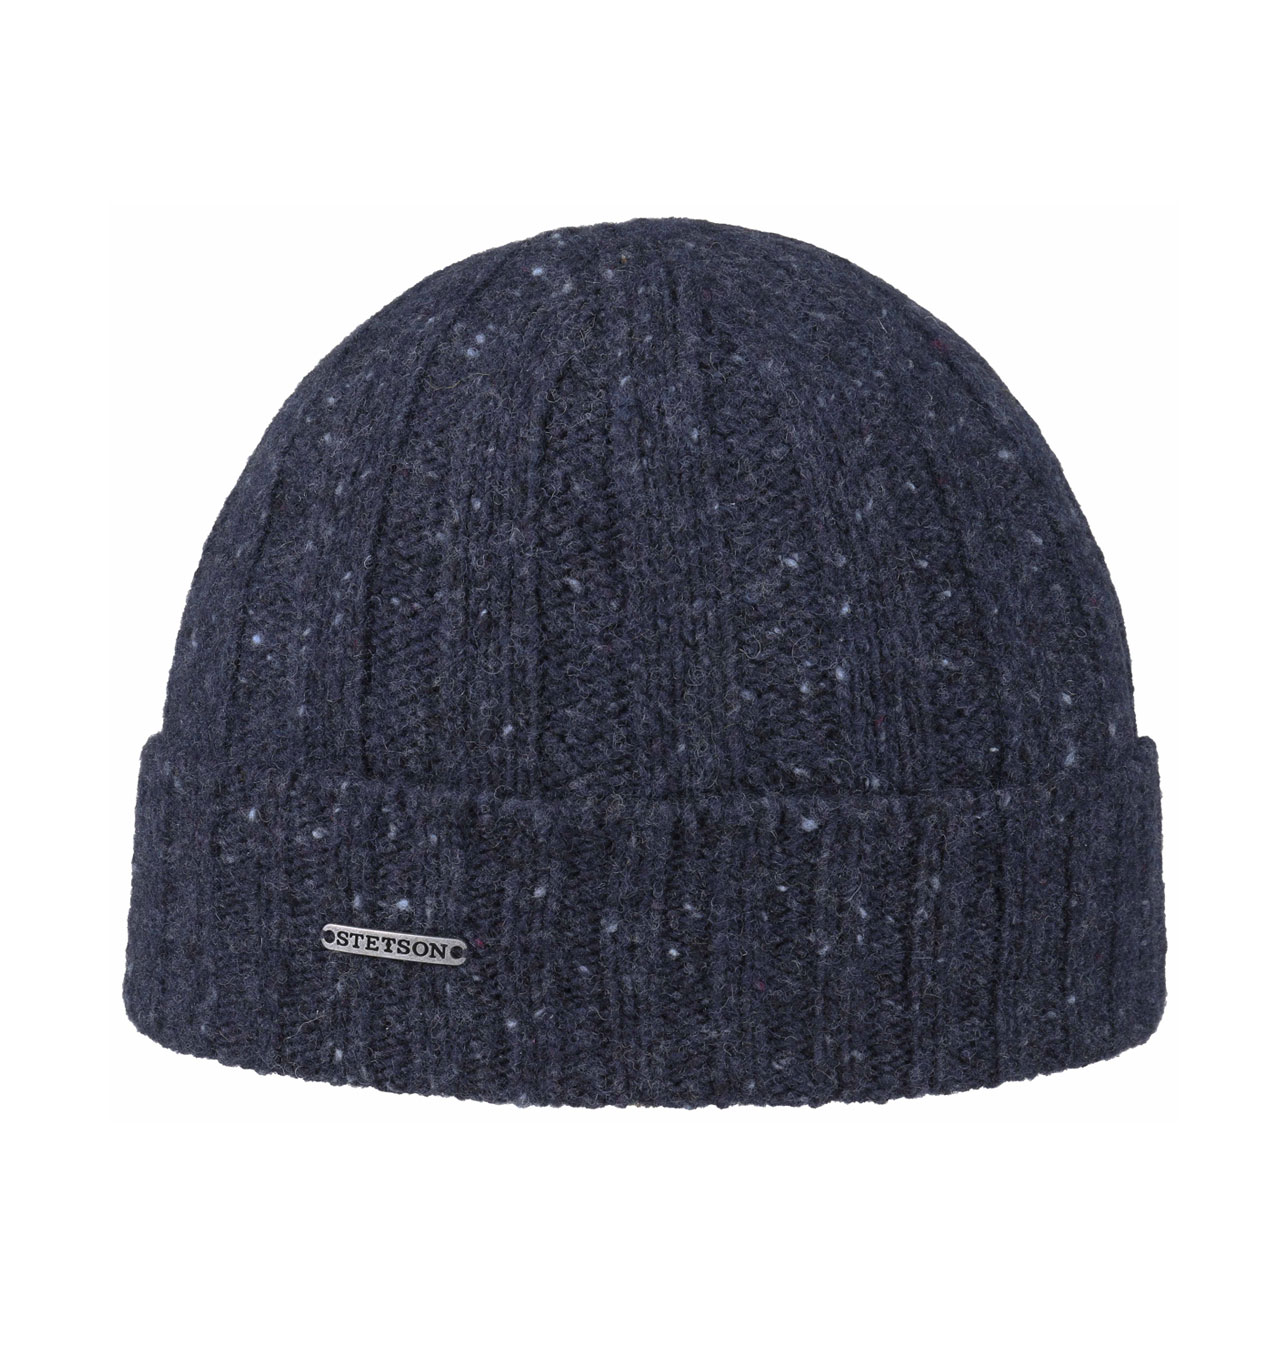 Stetson---Wisconsin-Donegal-Knit-Beanie---navy